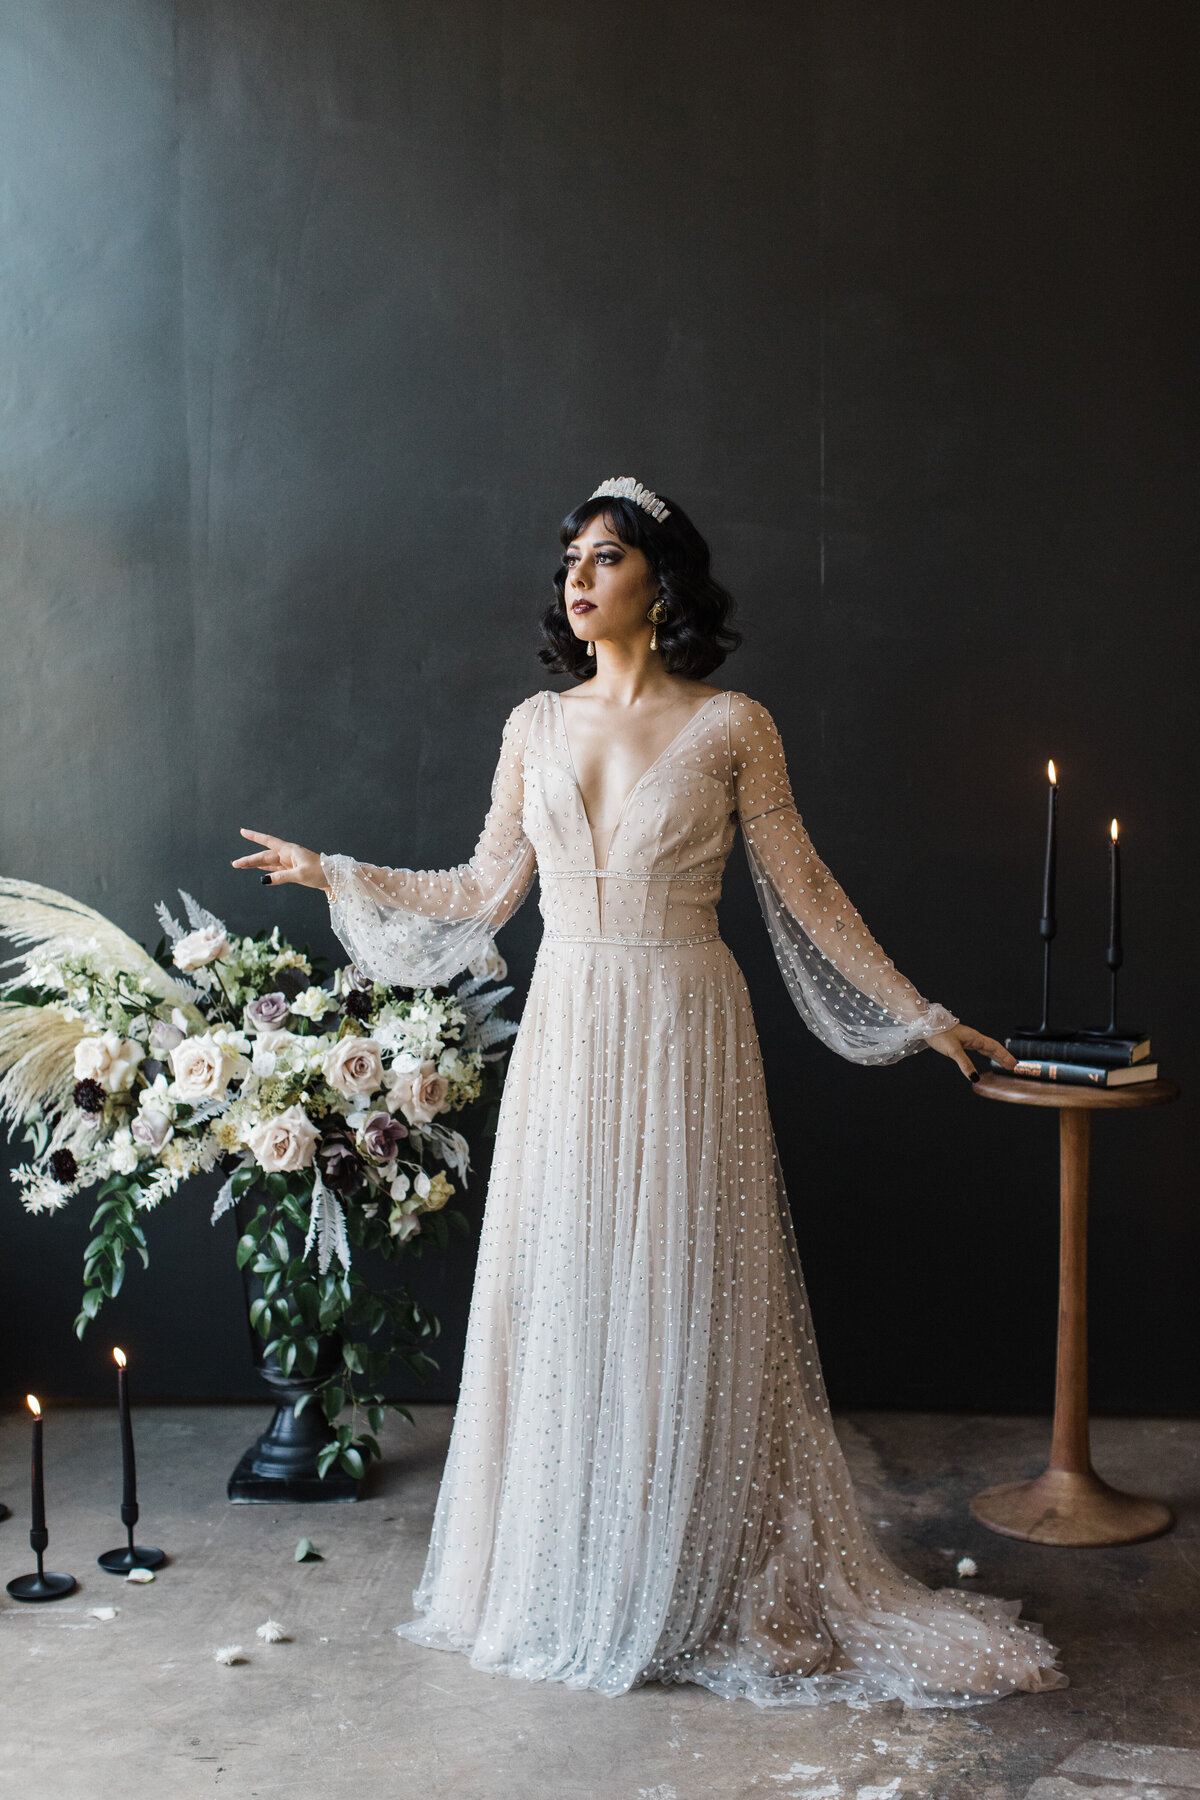 An artistic portrait of a bride on her wedding day in Dallas, Texas. She's wearing a long sleeve, flowing, intricate, white dress with a tiara and dark makeup. She's looking off to the side and reaching out her right arm in a focused yet relaxed pose. Her other arm rests on a small circular table covered with books and tall candles. On her other side are more candles and a large floral arrangement. The whole scene is backed by a black background.